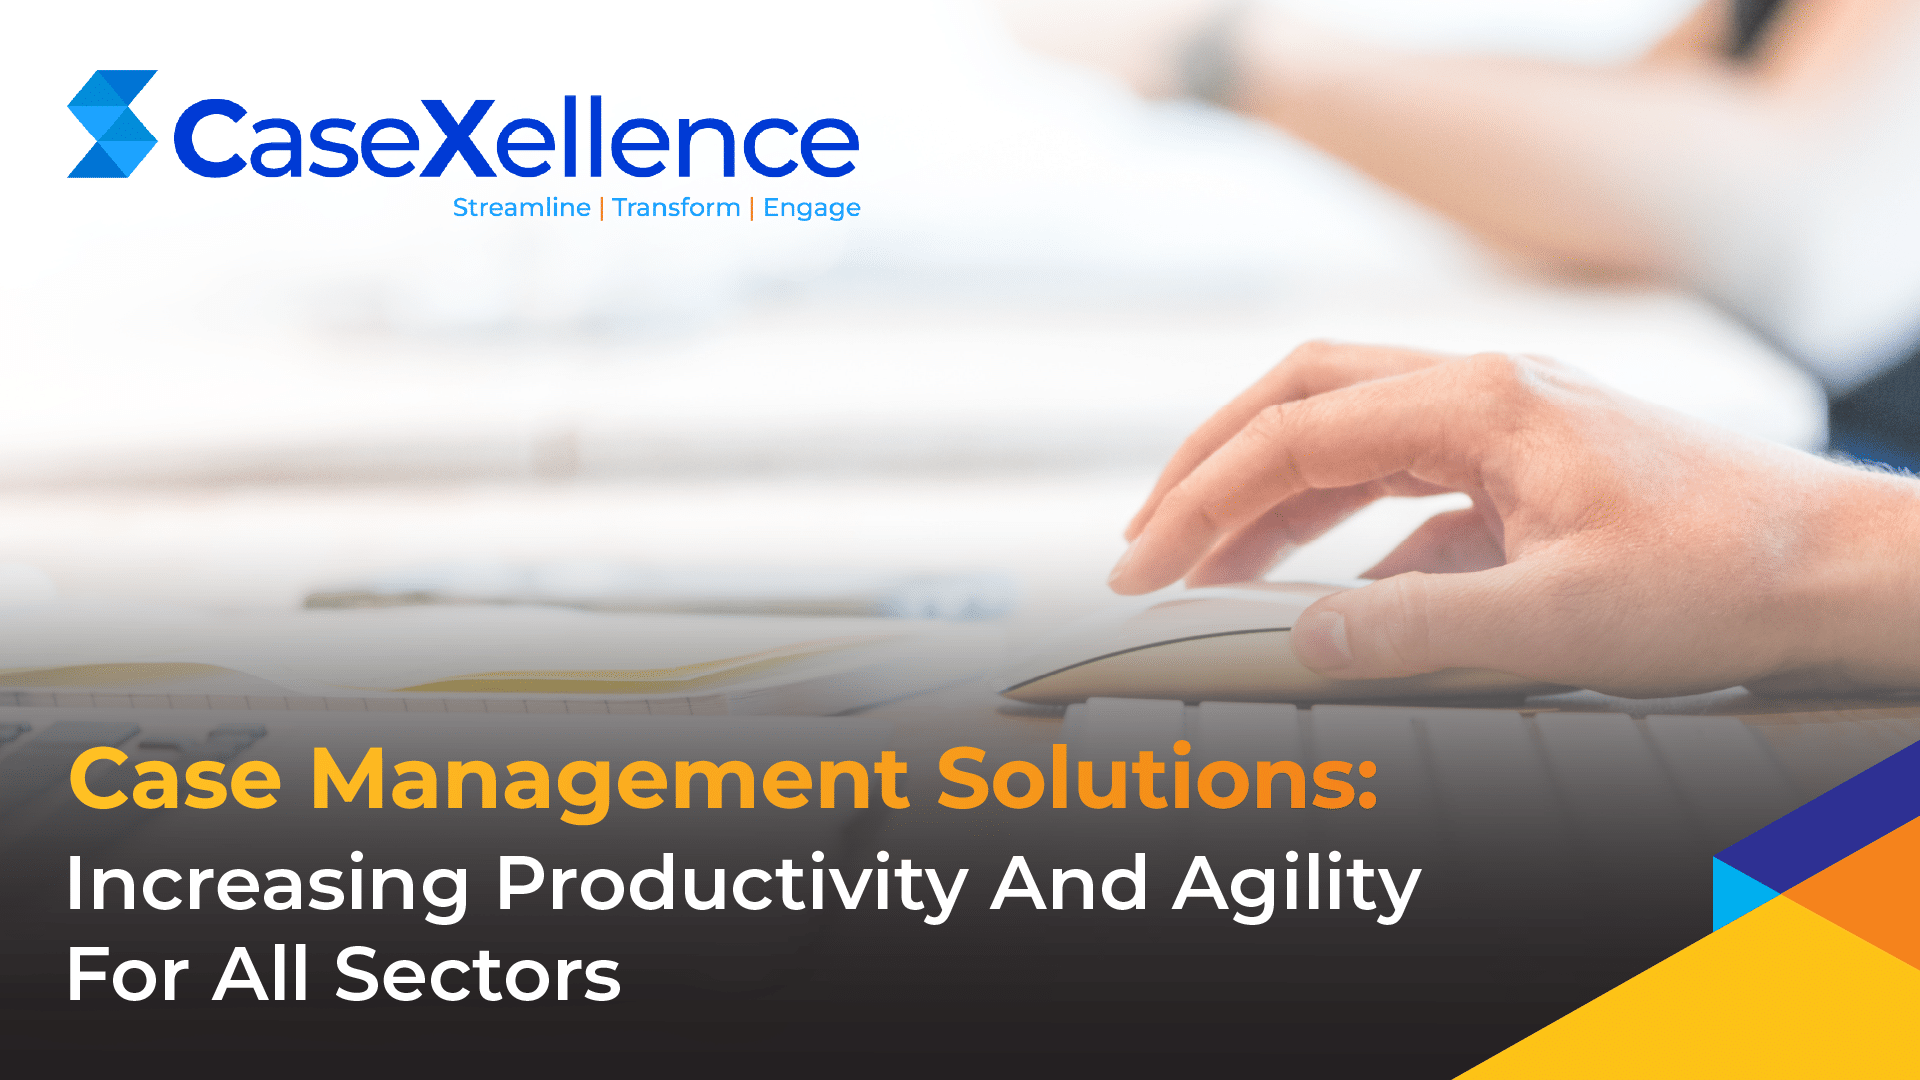 Case Management Solutions: Increasing Productivity And Agility For All Sectors